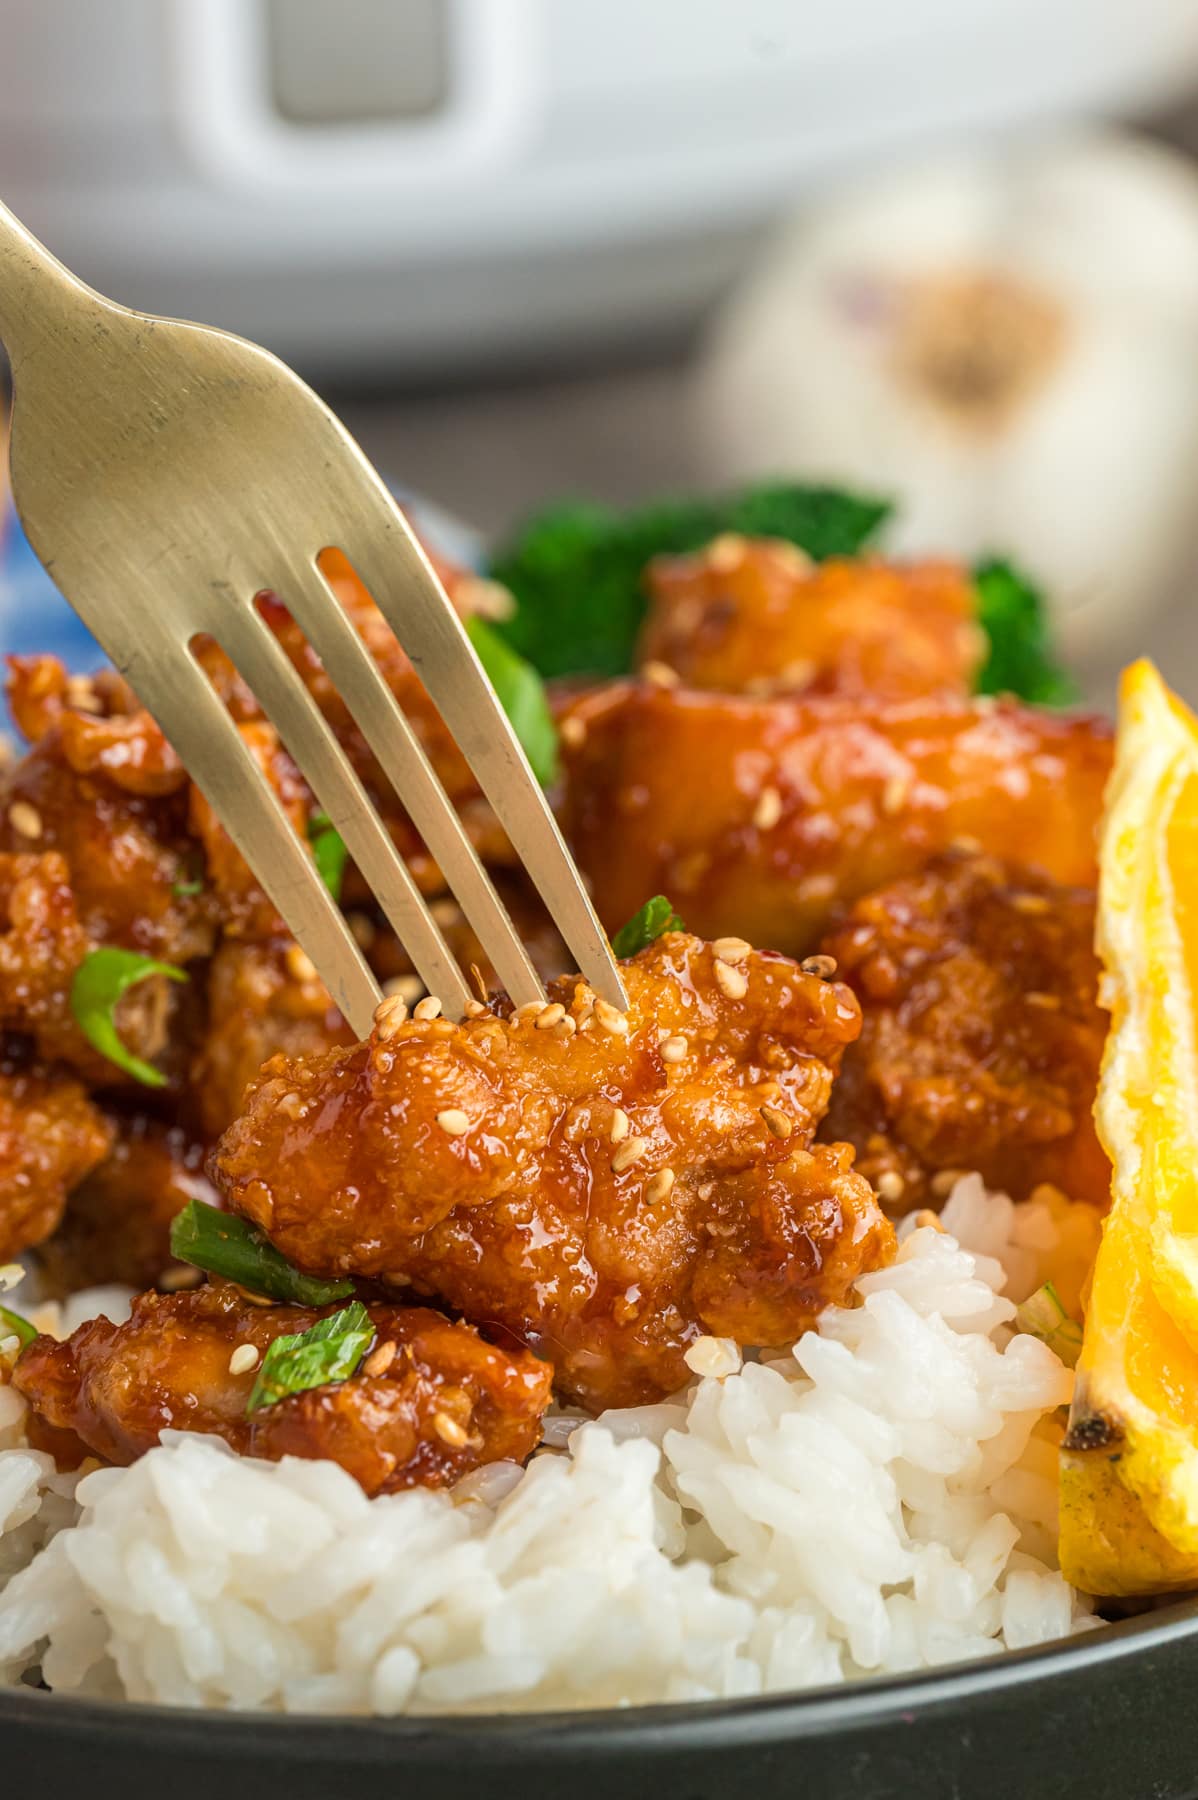 A fork picking up a piece of Orange chicken garnished with green onions on top of white rice.